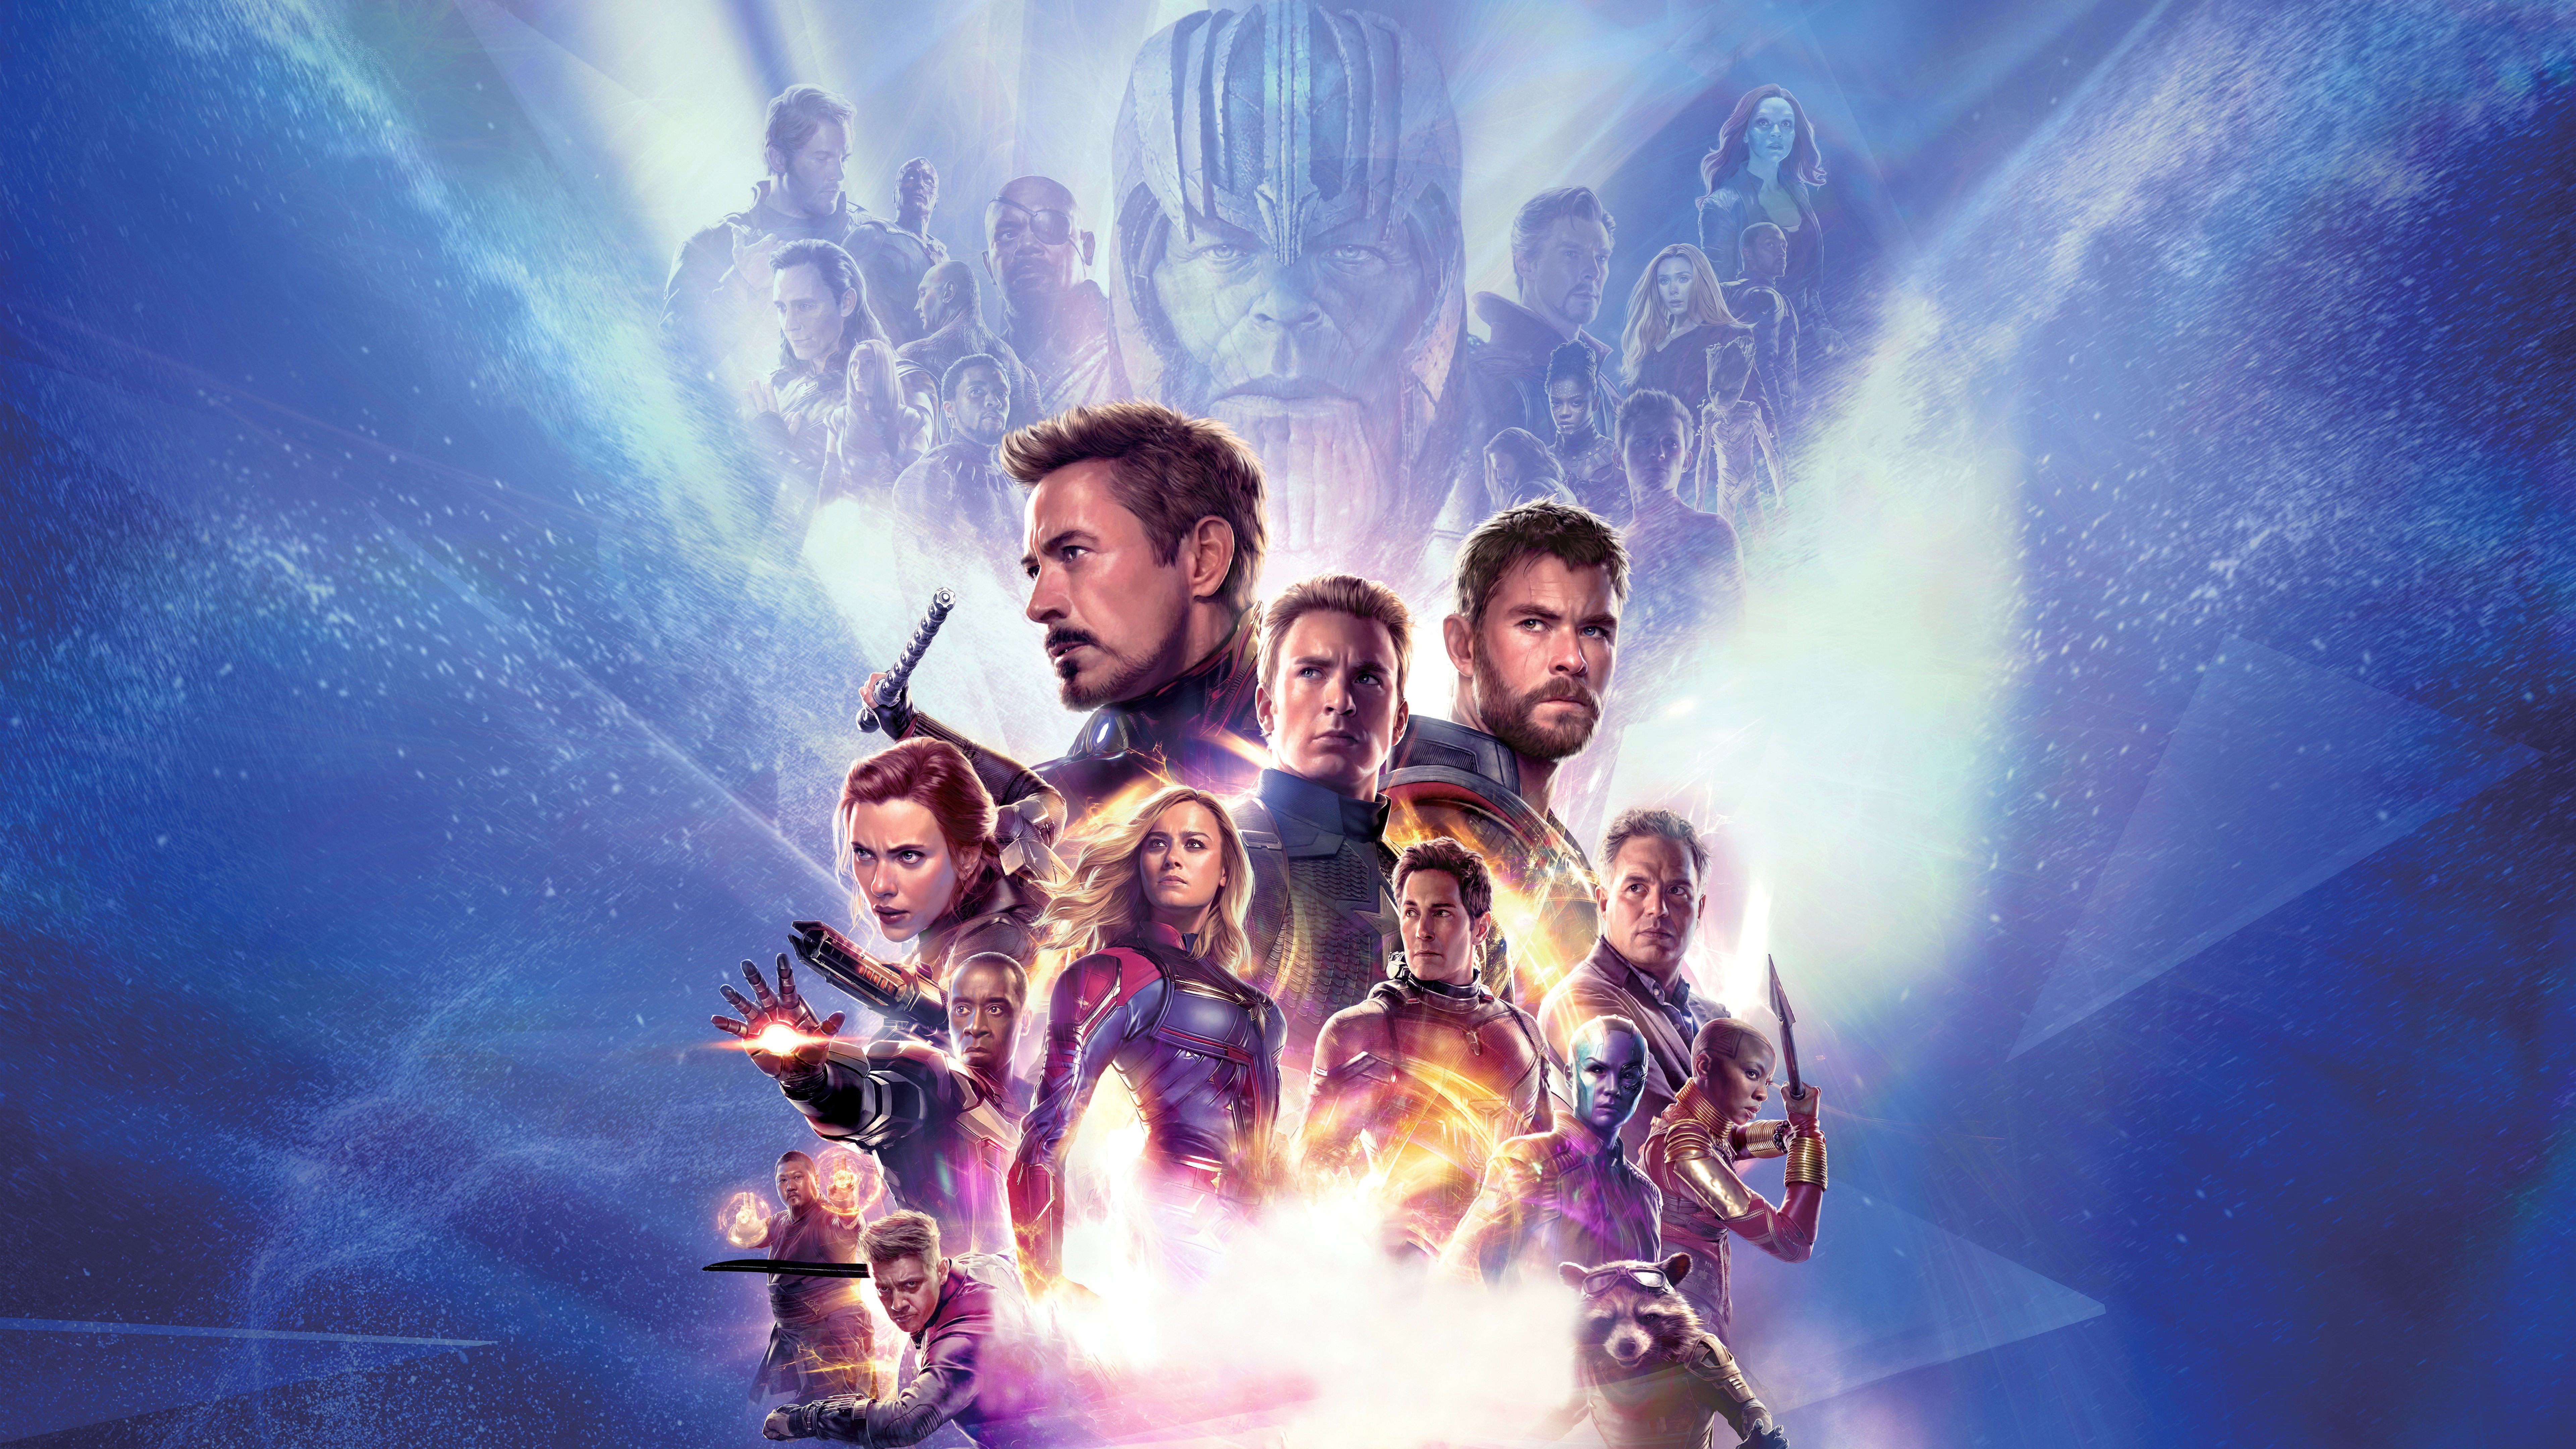 Thor HD Avengers Endgame Wallpapers  HD Wallpapers  ID 93124